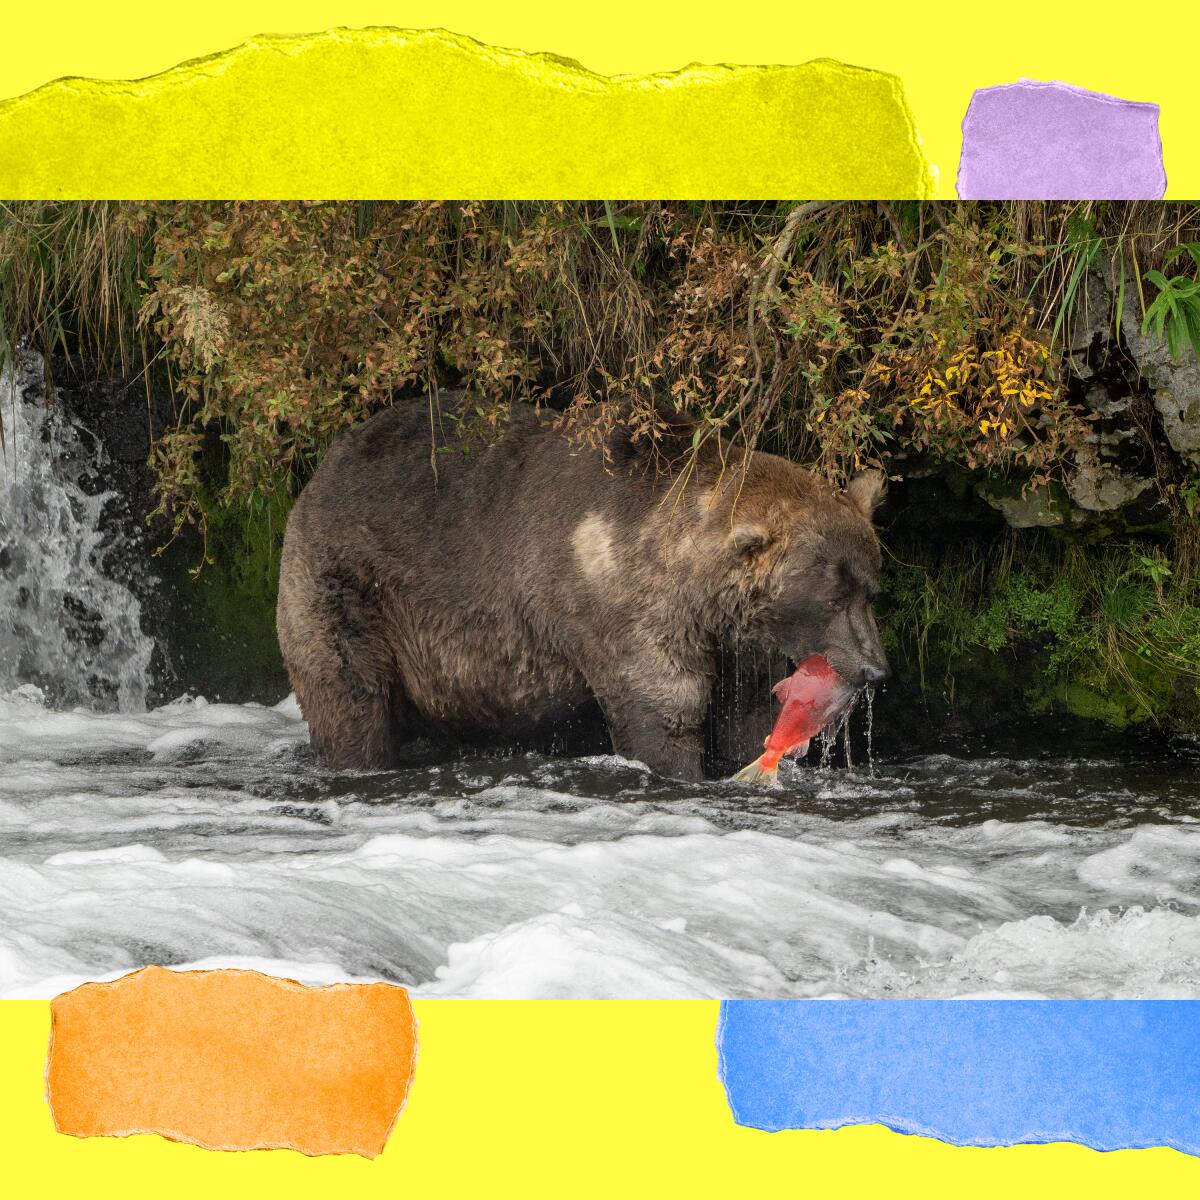 A large grizzly bear stands in a stream, soaked, with a red fish in its mouth.